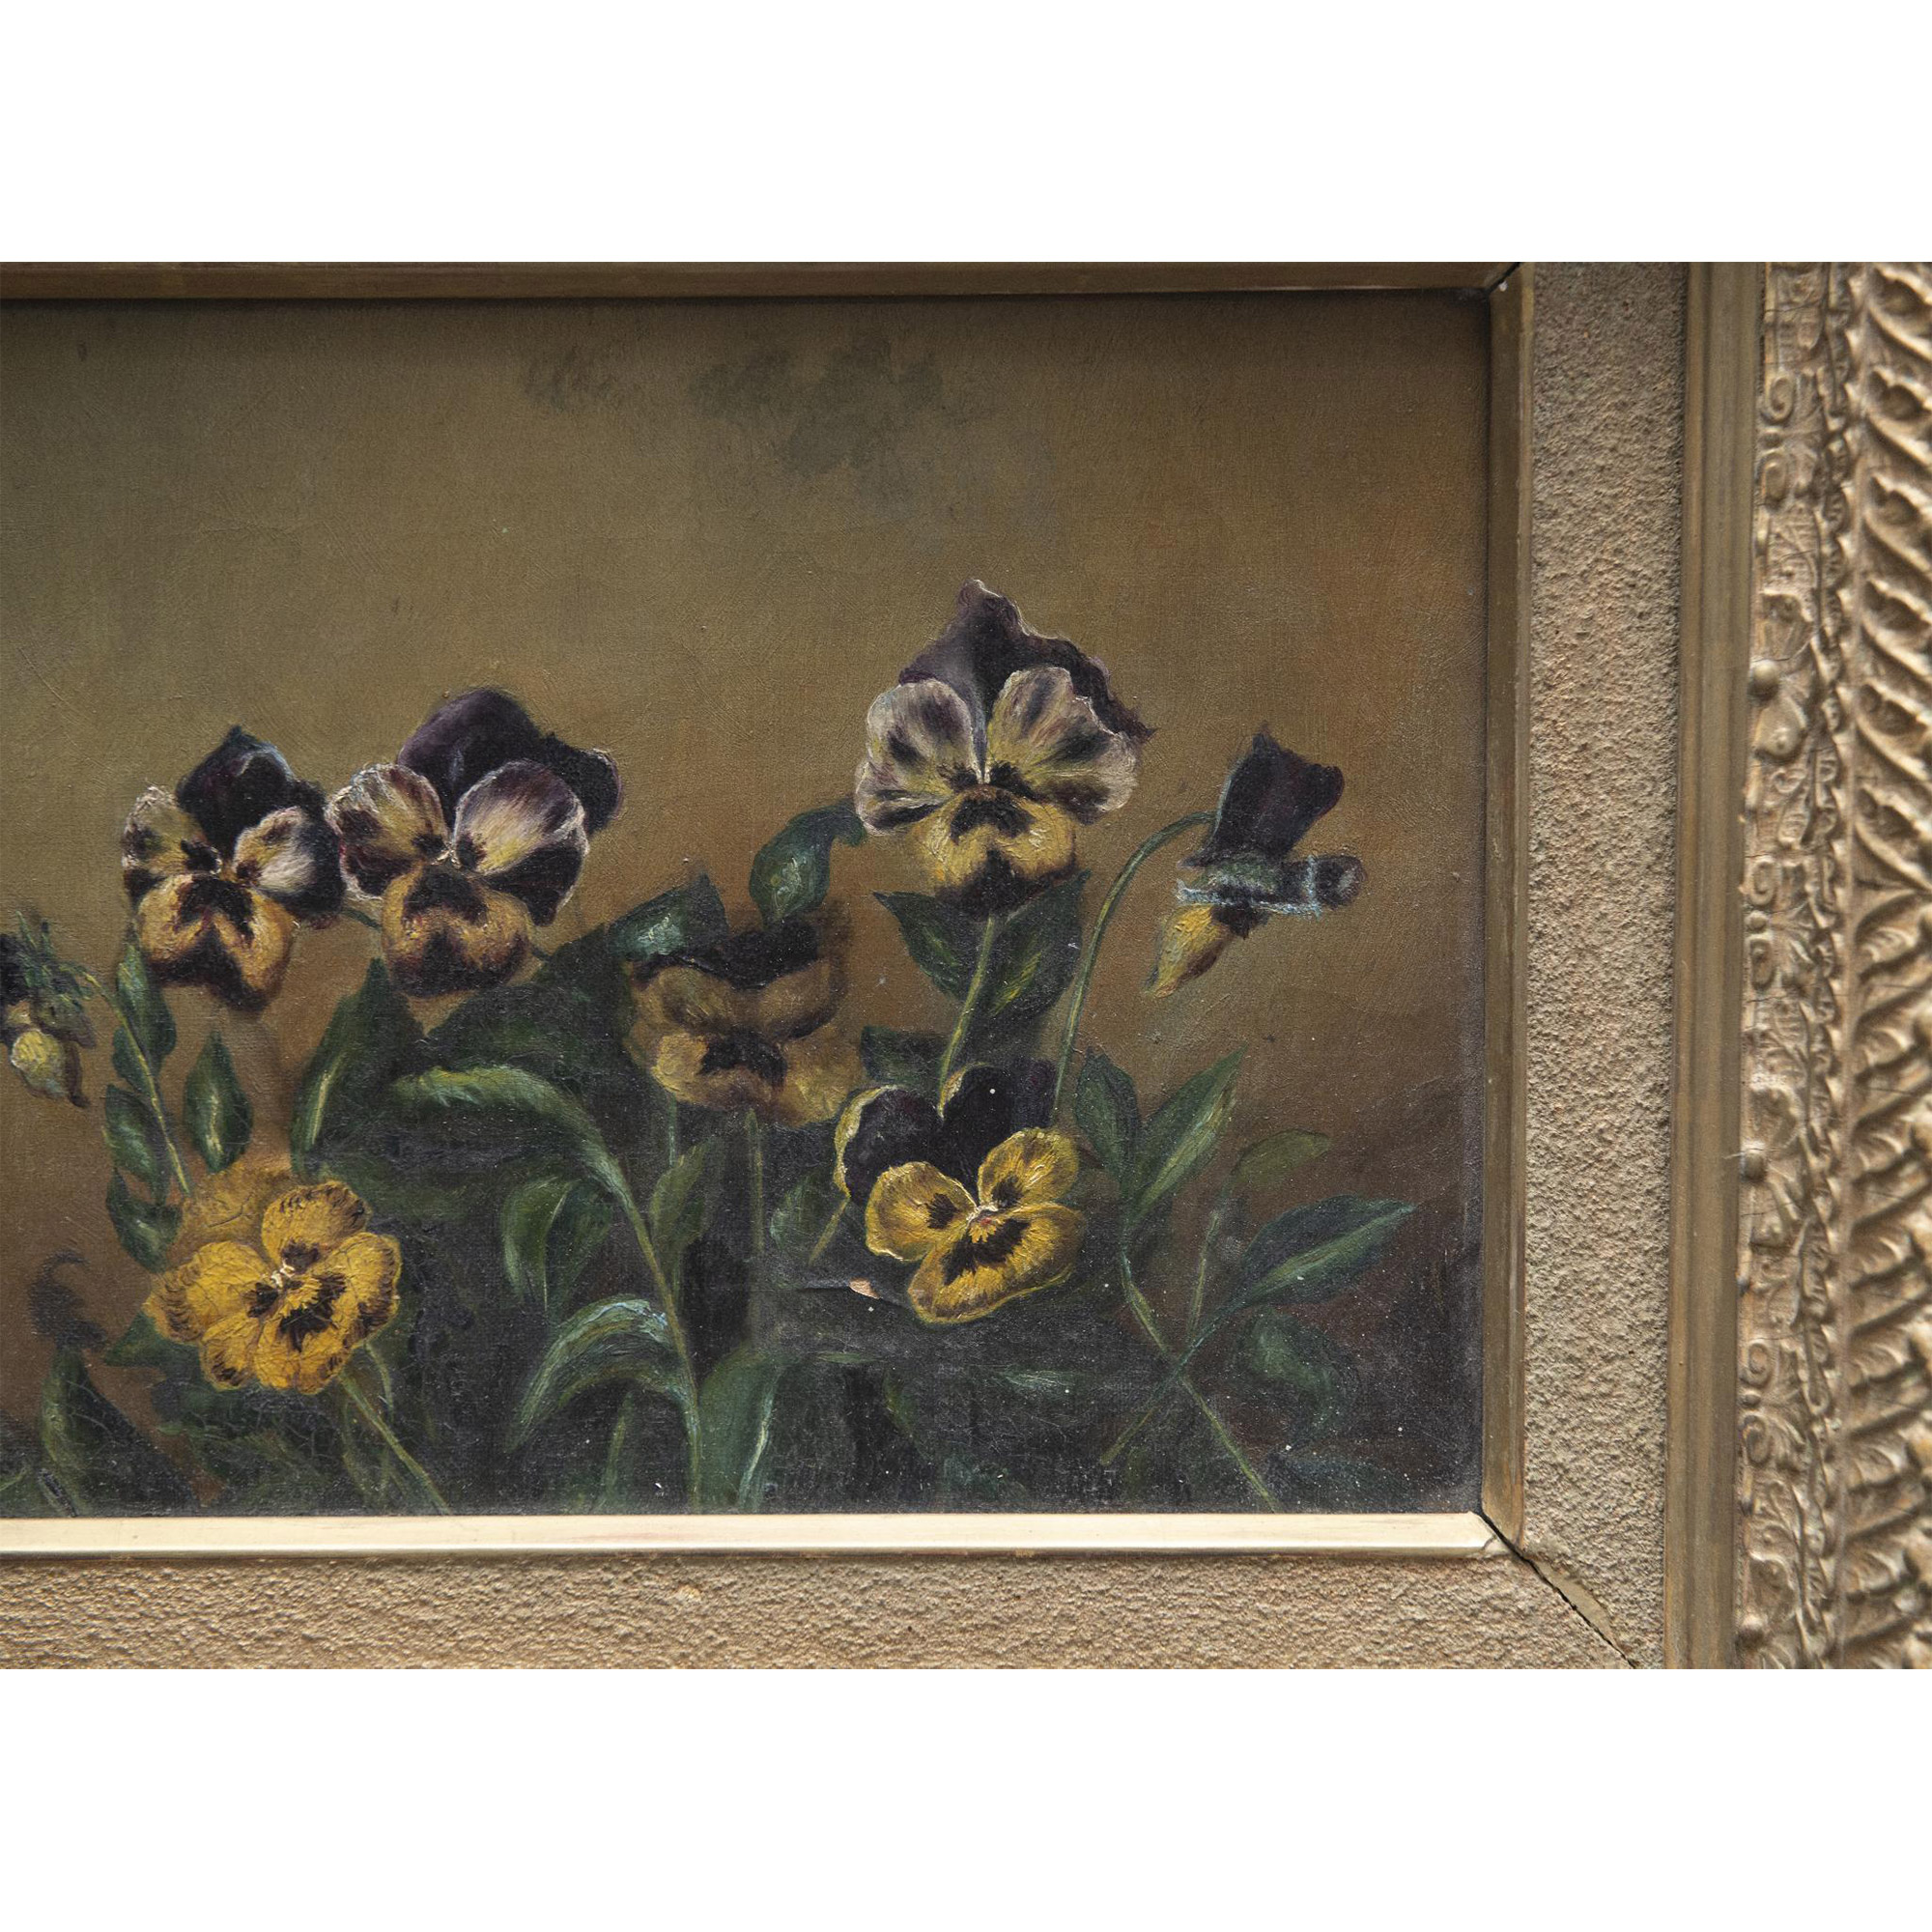 Antique Original Oil on Canvas, Still Life with Pansies - Image 3 of 6